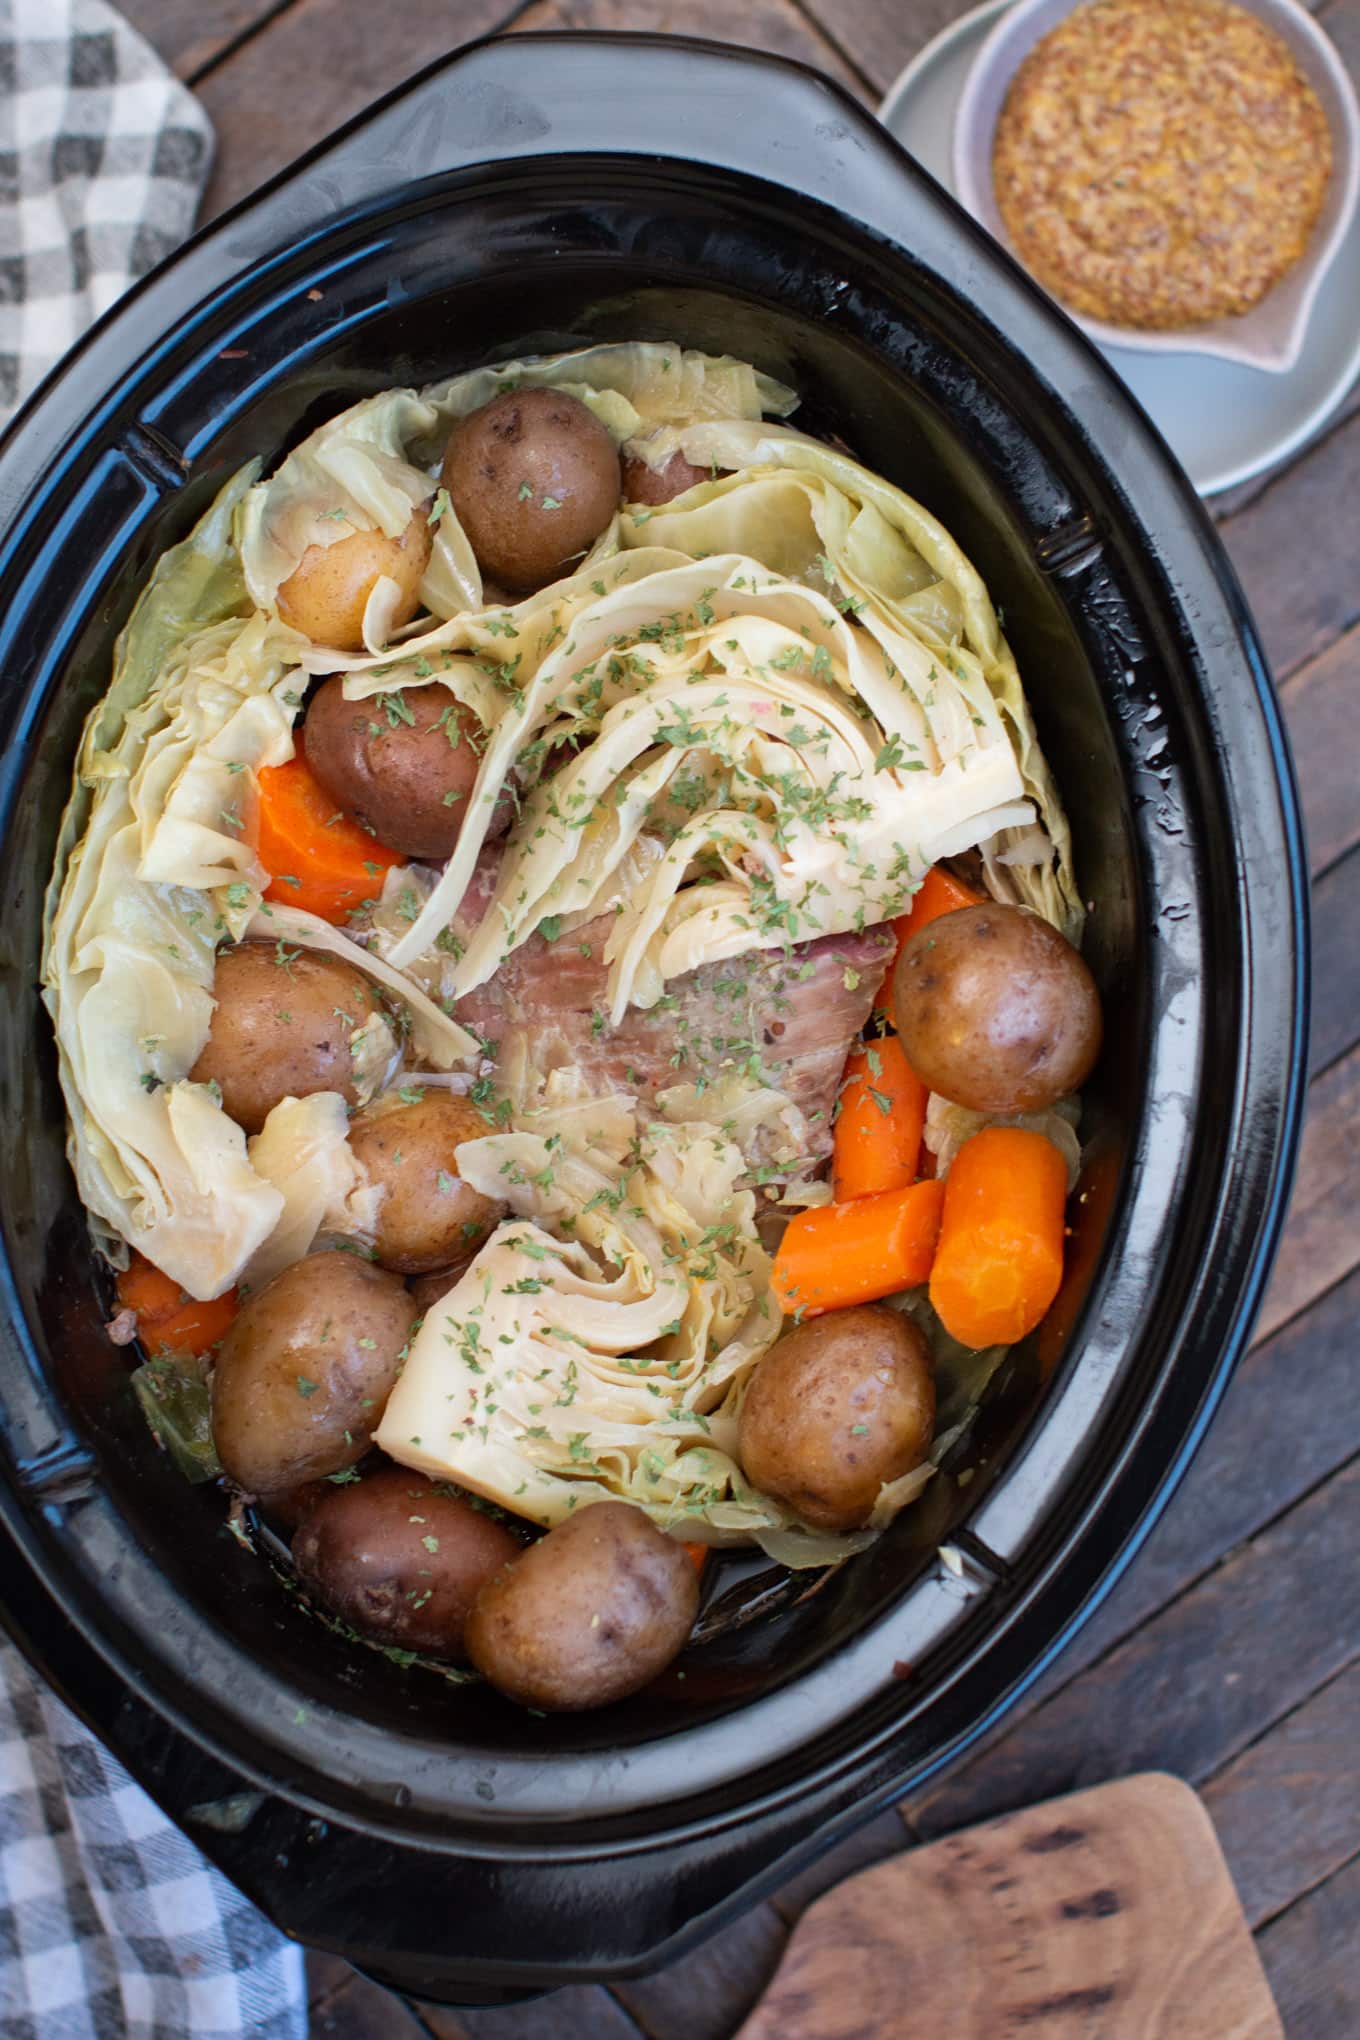 cooked corned beef, potatoes, cabbage and carrots in slow cooker.